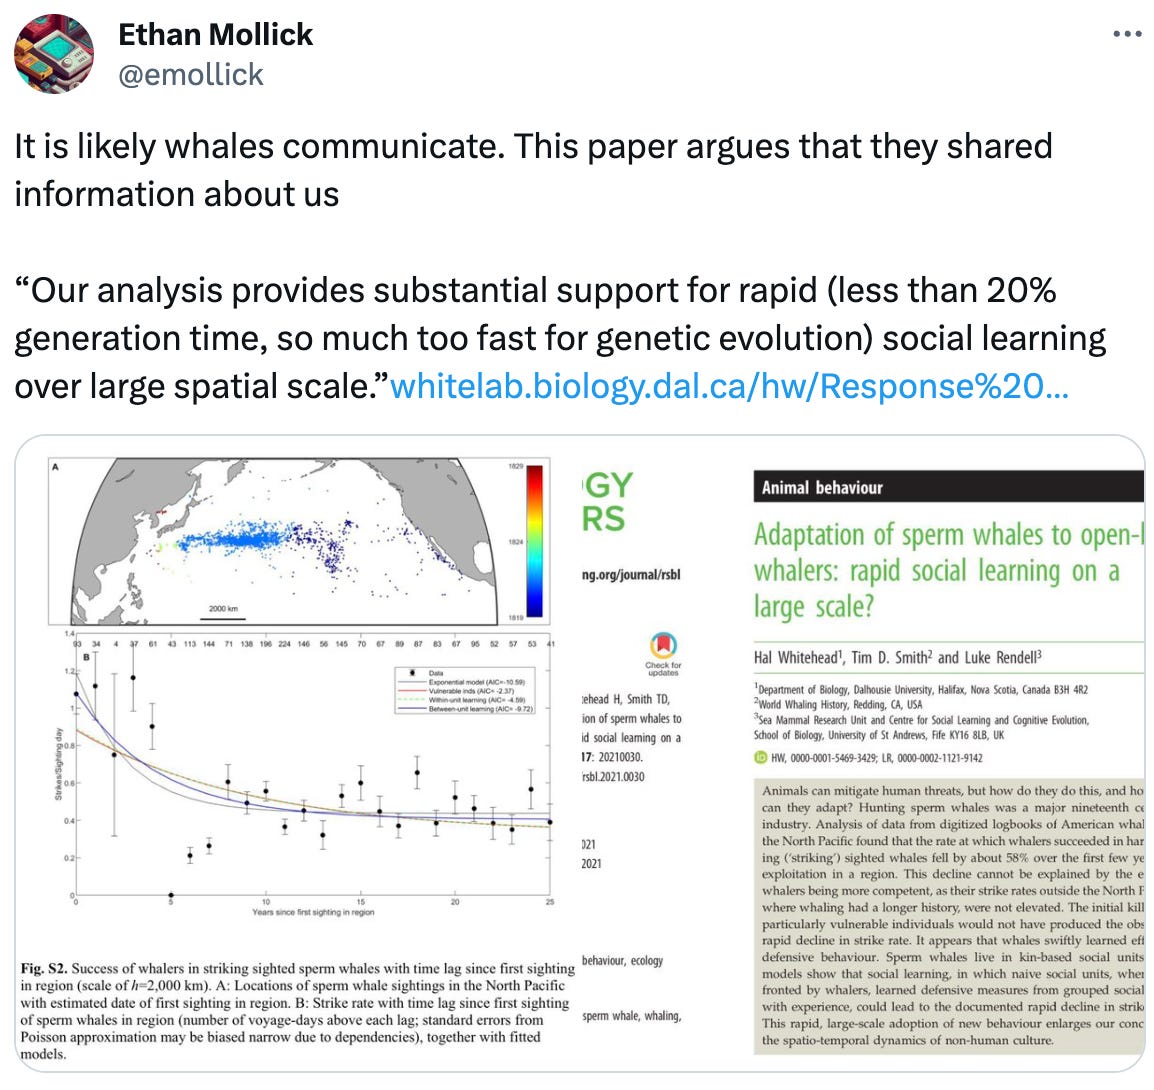  See new posts Conversation Ethan Mollick @emollick It is likely whales communicate. This paper argues that they shared information about us  “Our analysis provides substantial support for rapid (less than 20% generation time, so much too fast for genetic evolution) social learning over large spatial scale.”http://whitelab.biology.dal.ca/hw/Response%20of%20whales%20to%20whaling%20Biol_Lett_2021.pdf